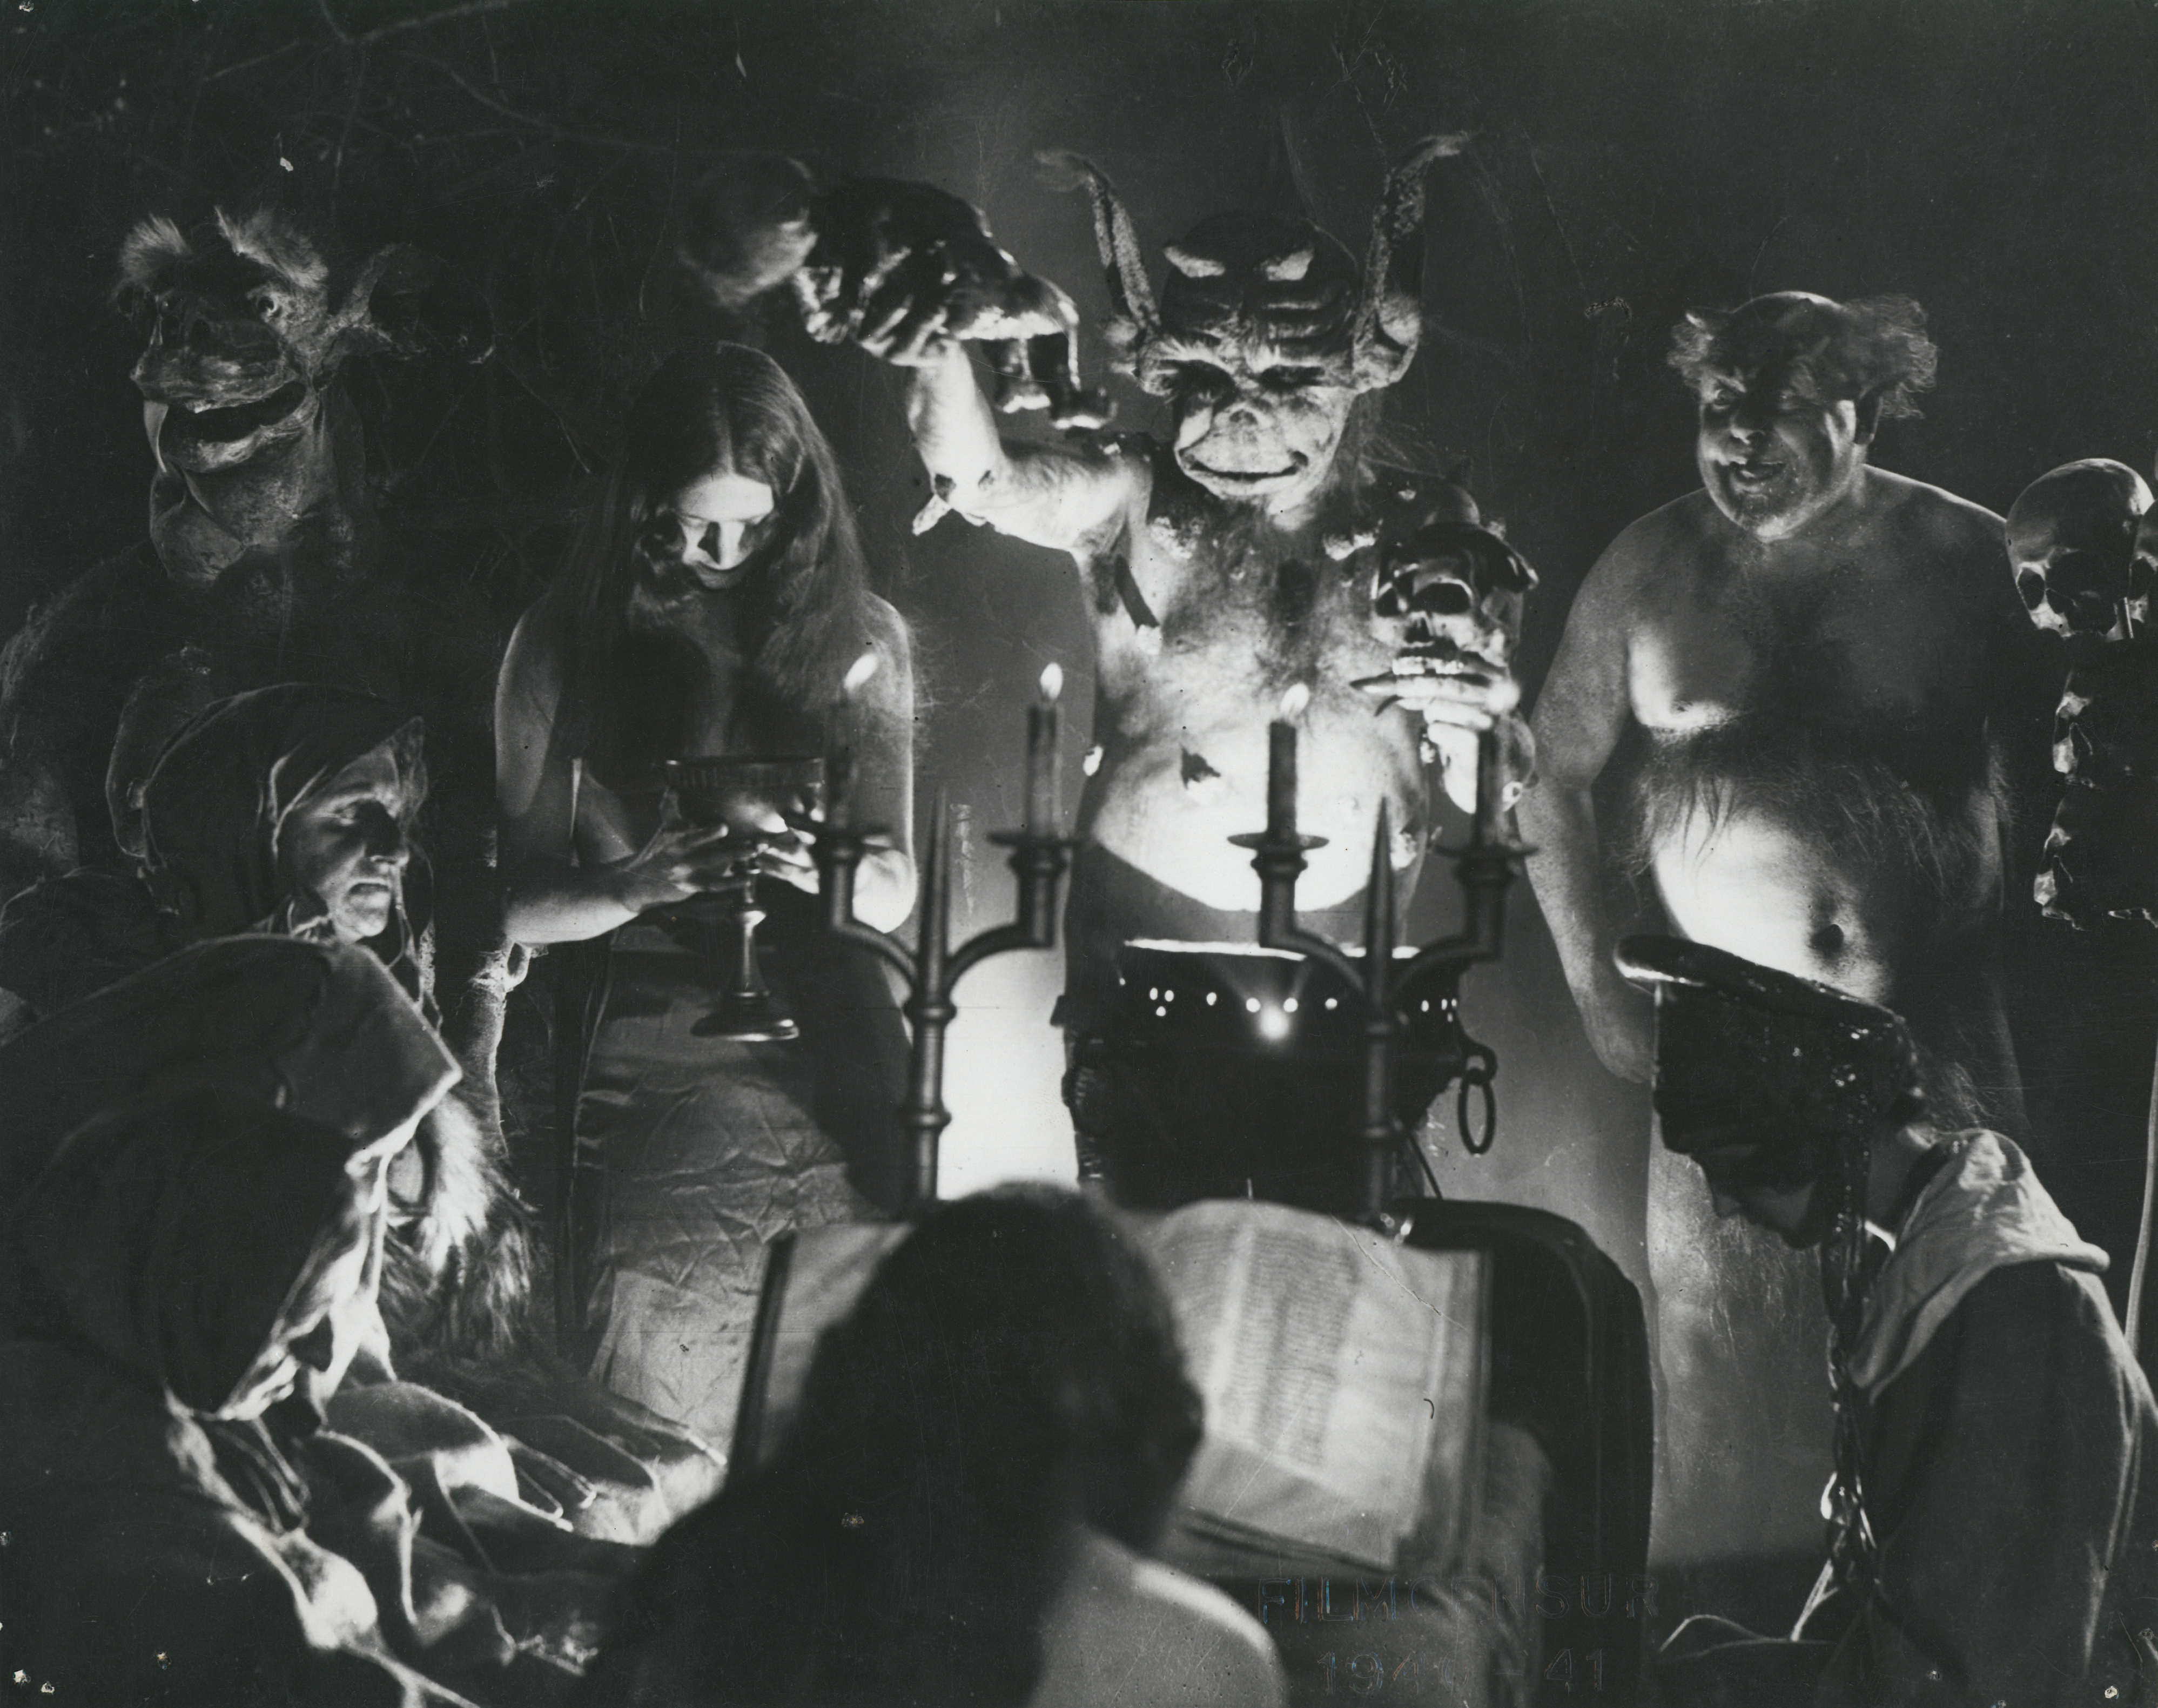 A promotional picture for the film "Häxan: Witchcraft Through the Ages", which was a 1922 Swedish-Danish silent film.